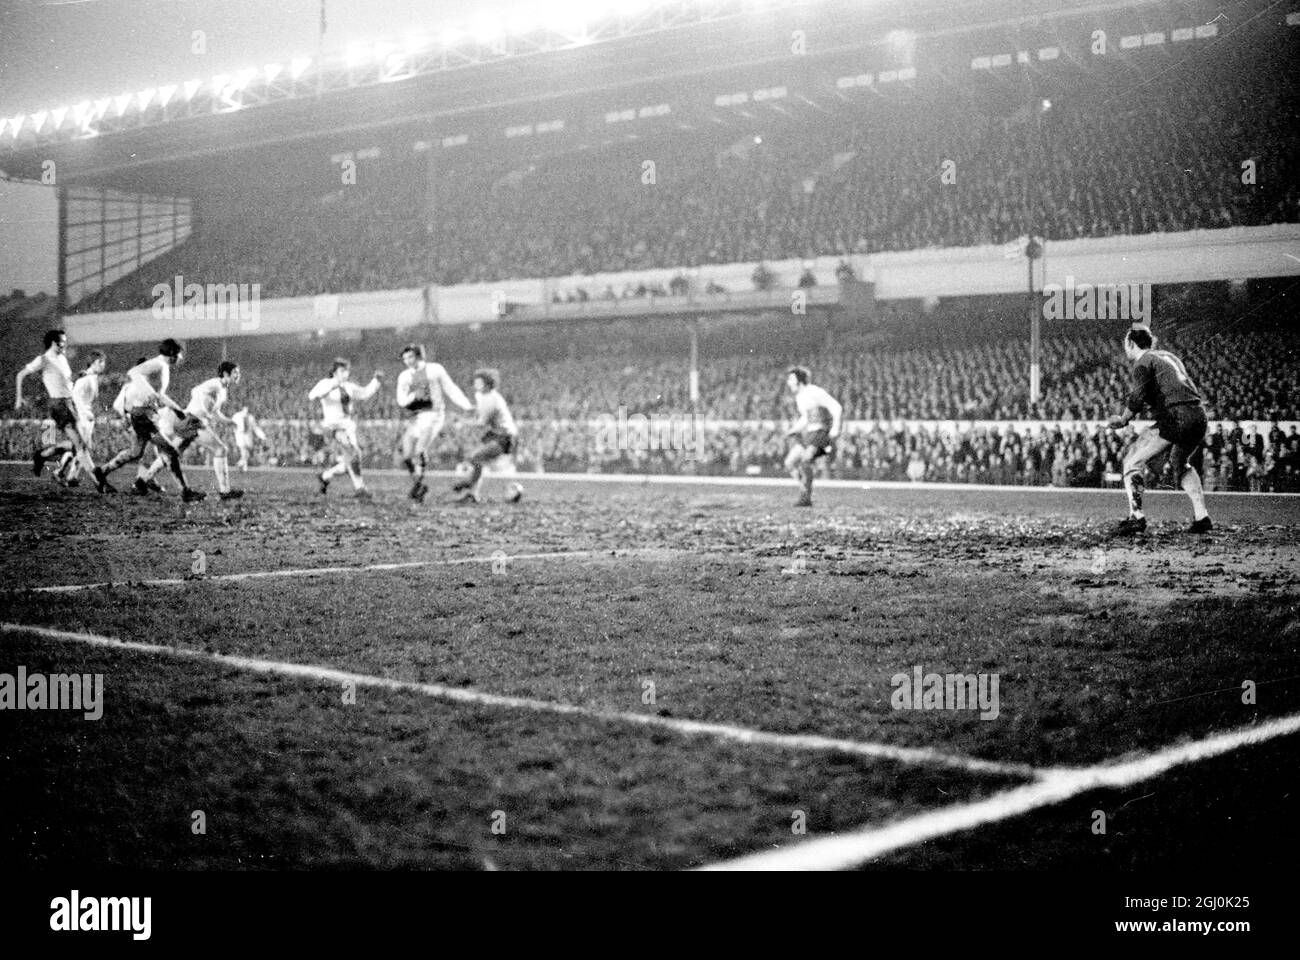 European Fairs Cup Semi-Final 1st Leg. Arsenal V Ajax Eddie Kelly of Arsenal (centre) heads the ball away during an Ajax attack in the European Fairs Cup Semi-Final at Highbury. On the extreme left is Charlie George and on the right is Frank McLintock: and extreme right (background) is Jon Sammels. 8th April 1970 Stock Photo